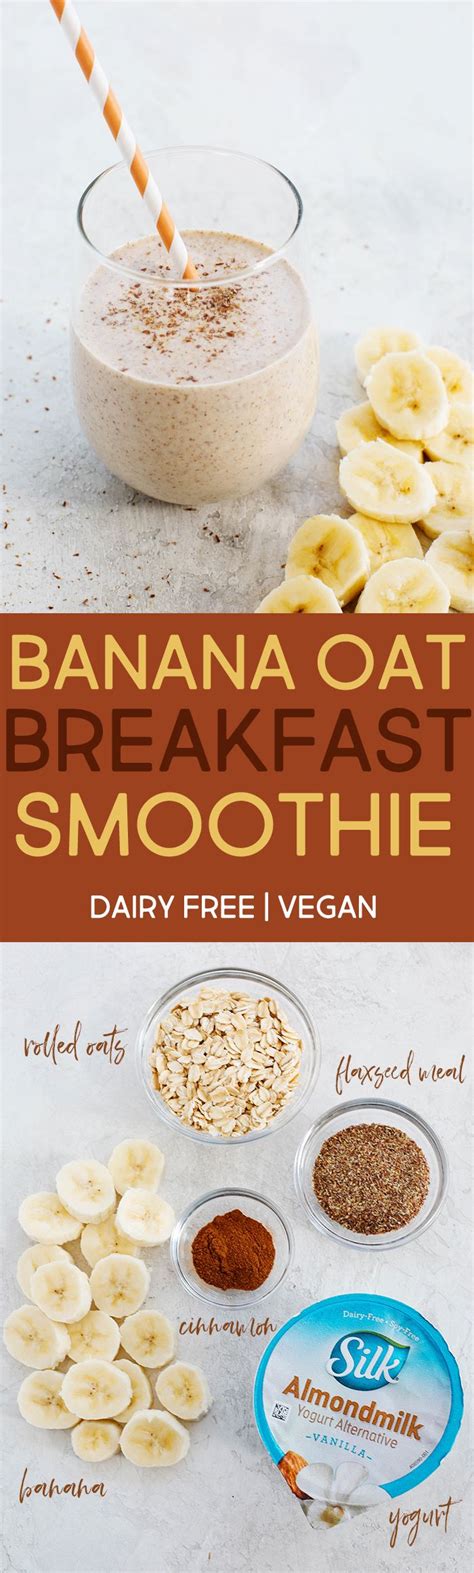 Start Your Morning Off With This Thick And Creamy Banana Oat Breakfast